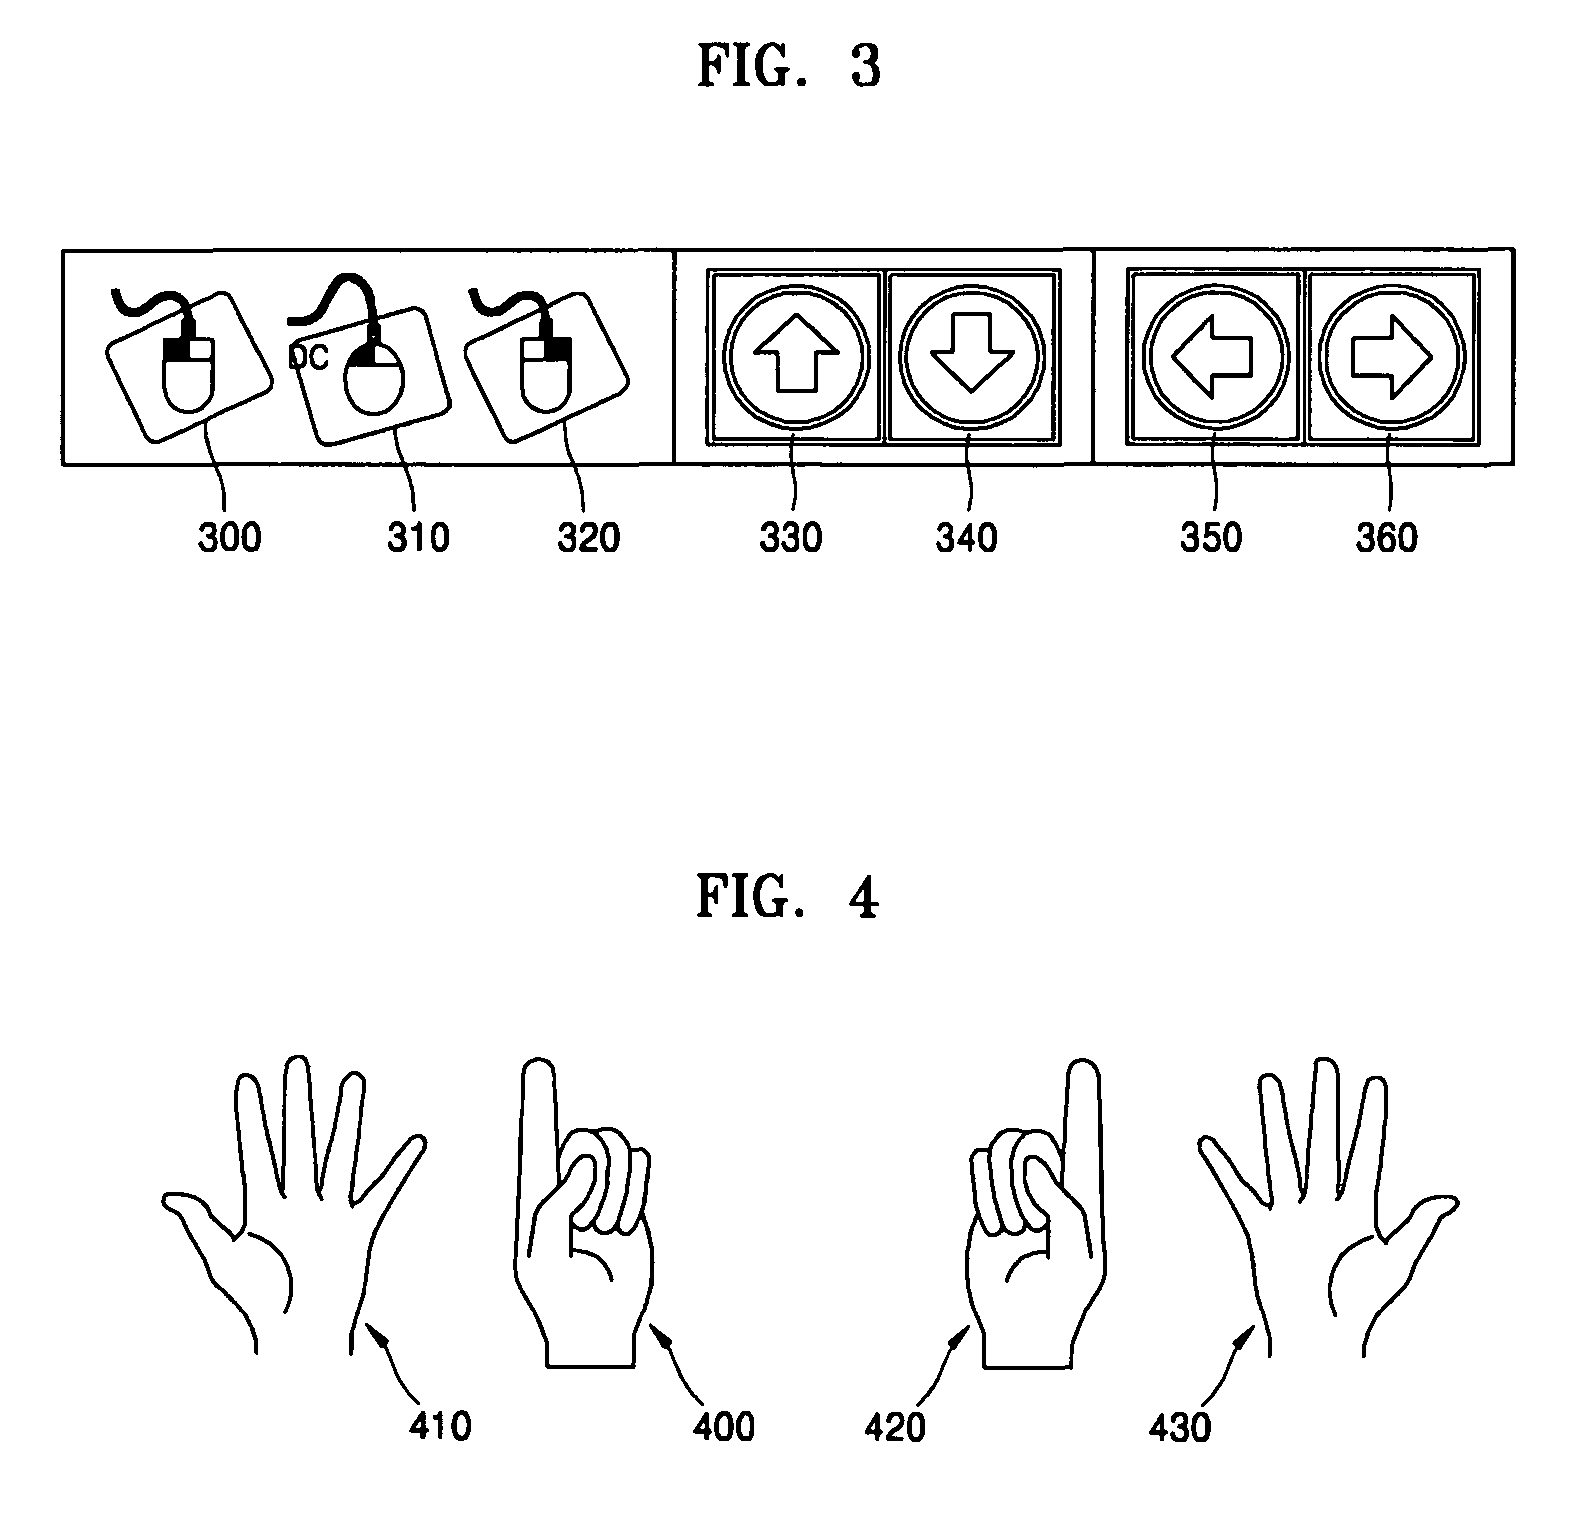 Virtual mouse driving apparatus and method using two-handed gestures